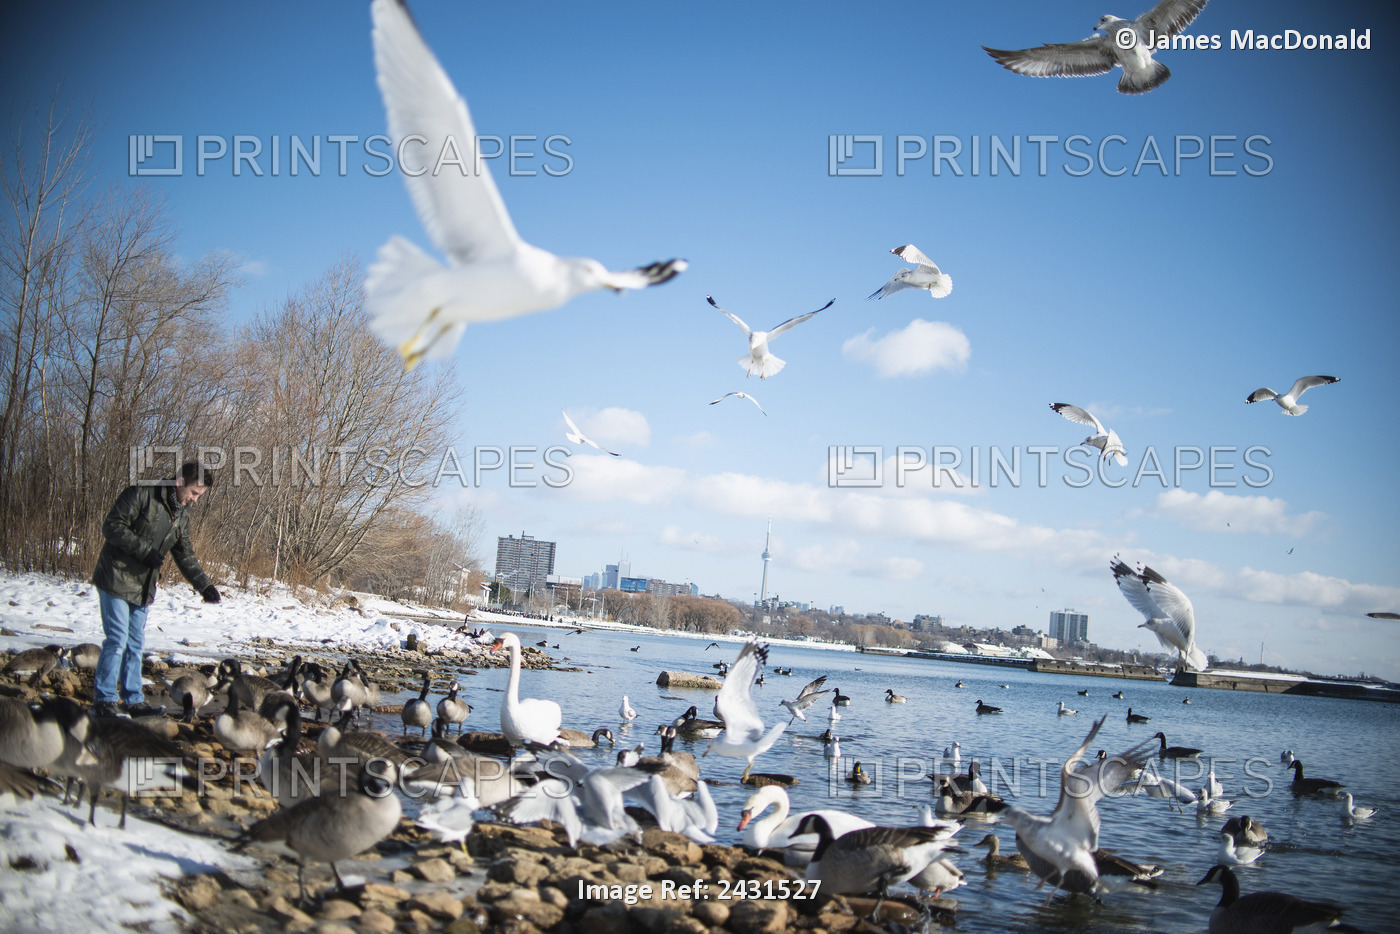 A Man Feeds A Growing Flock Of Birds On The Shore Of Lake Ontario In Winter; ...